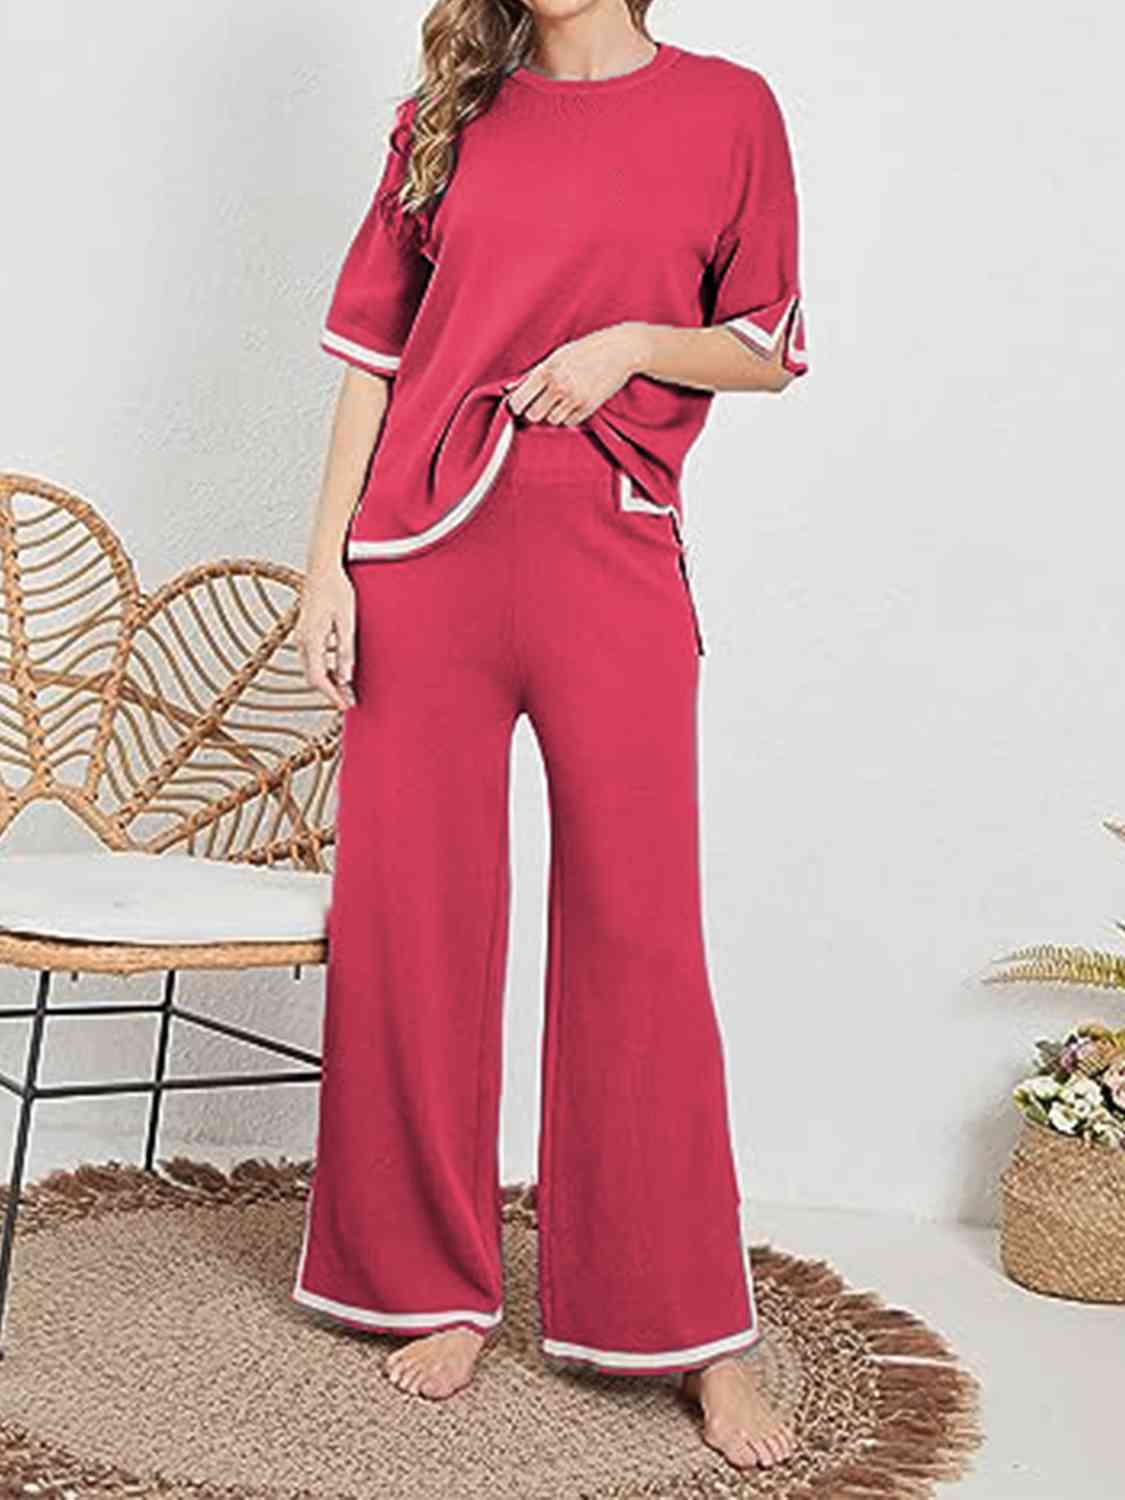 Women's Contrast High-Low Sweater and Knit Pants Set Deep Rose